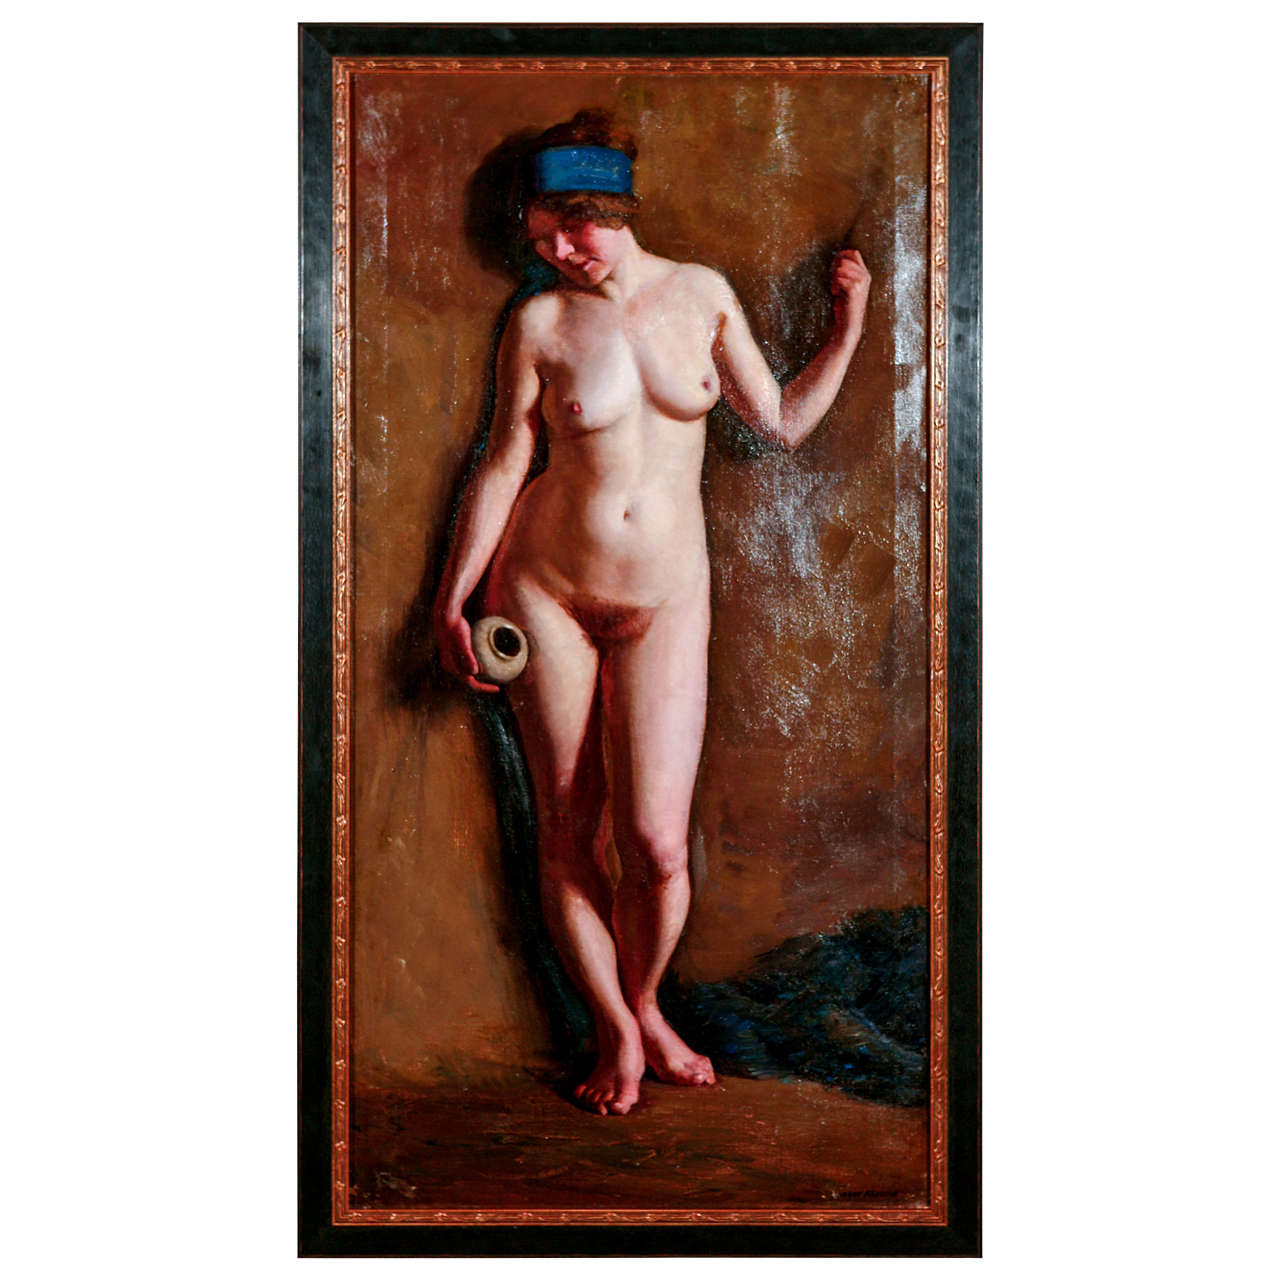 H. Farlow, Early 20th Century Nude Study For Sale